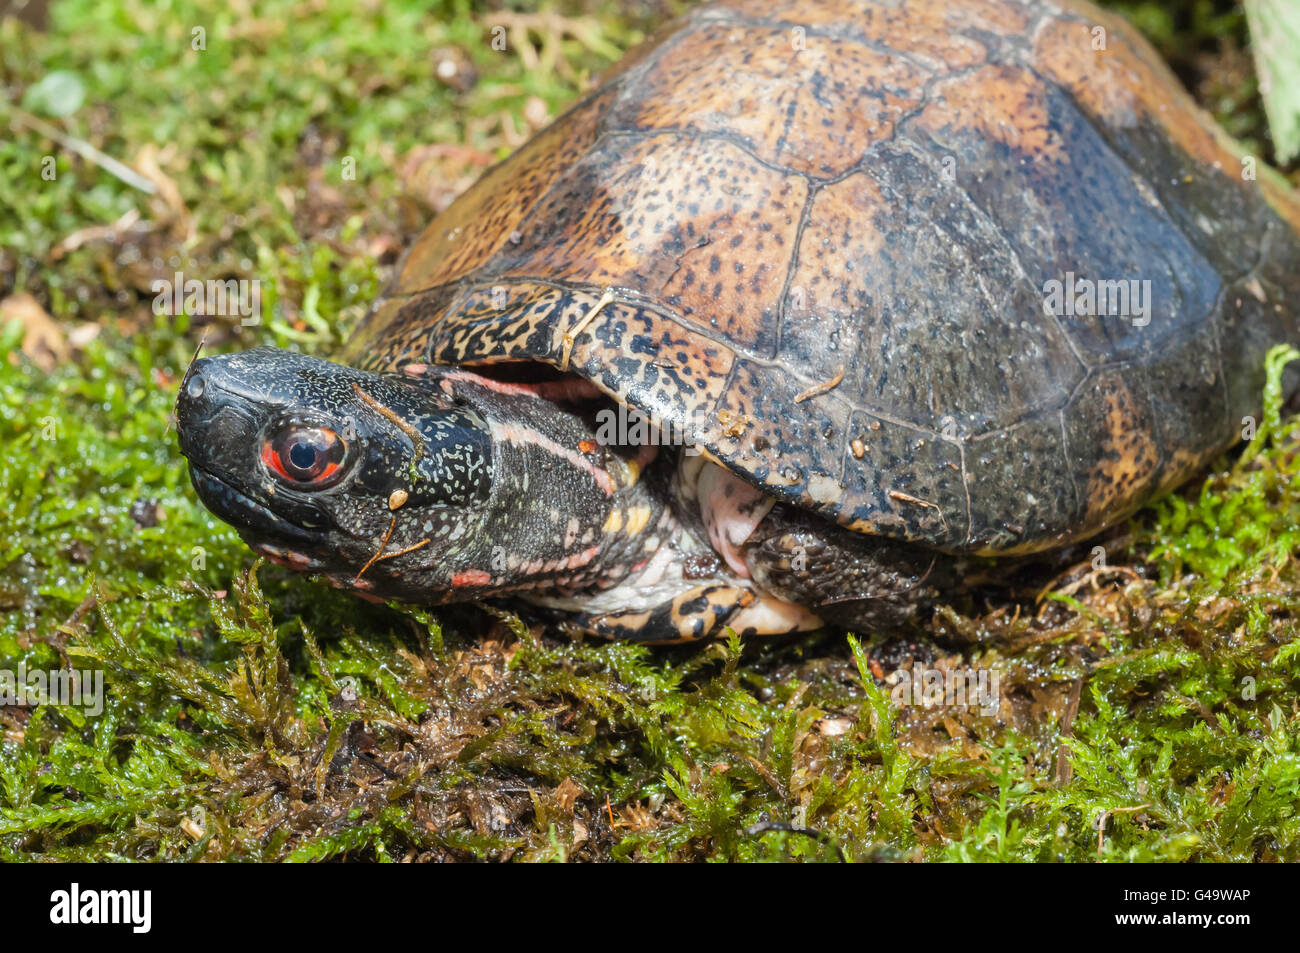 Beal's eyed turtle or Four-eyed turtle, Sacalia bealei, native to Southern China and Northern Vietnam Stock Photo